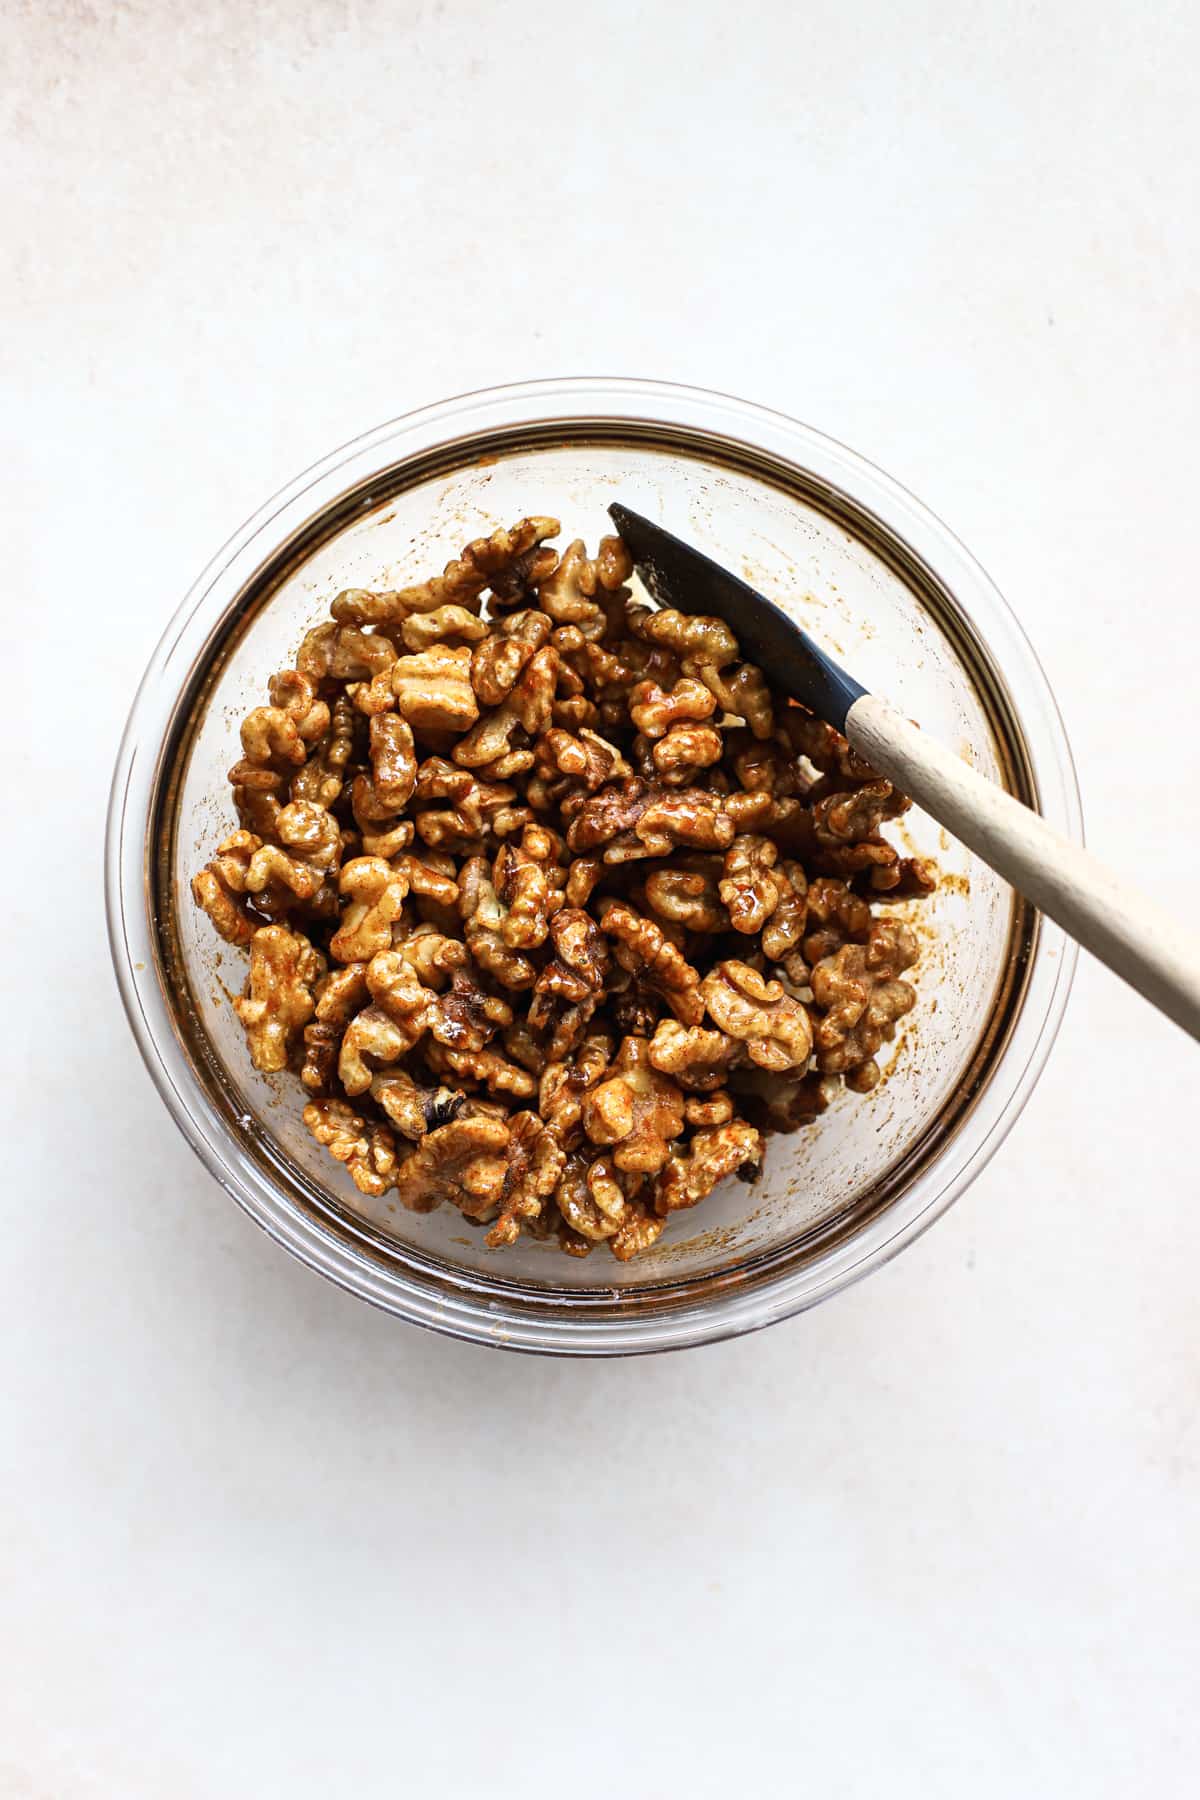 Walnuts, cayenne, salt, and maple syrup tossed together in clear glass bowl with spatula, on beige and white surface